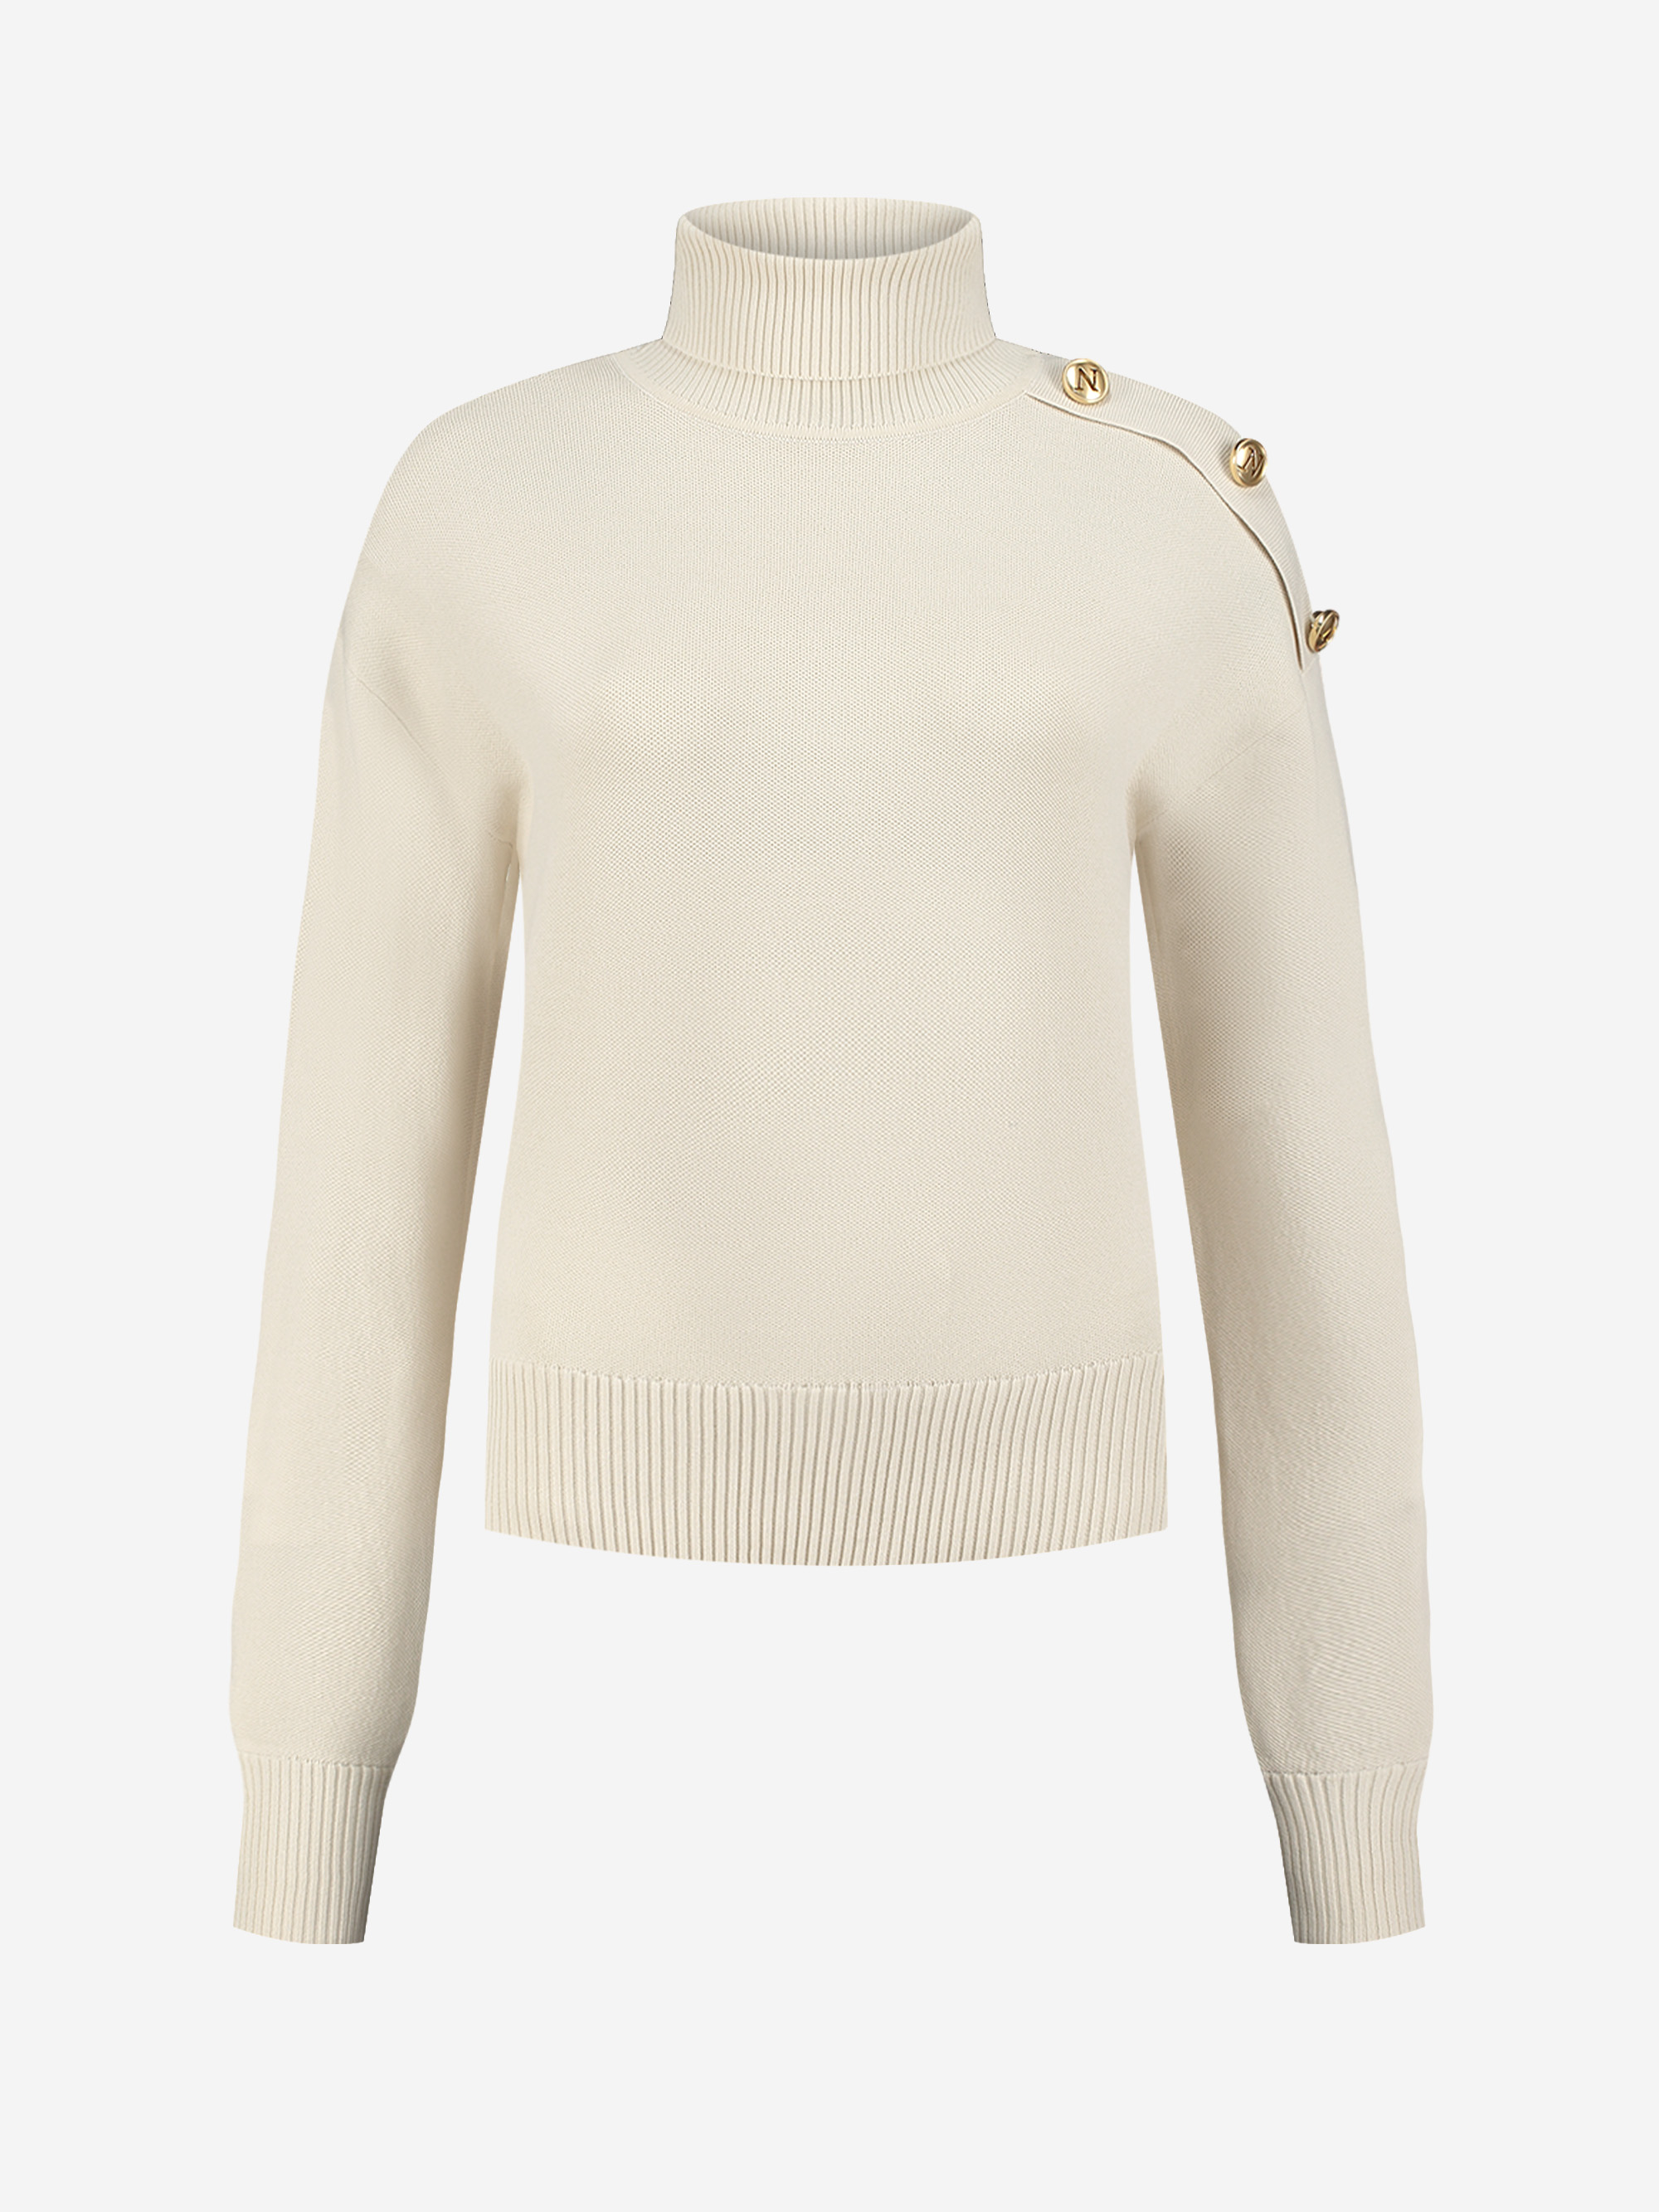 Sweater with button detail on shoulder